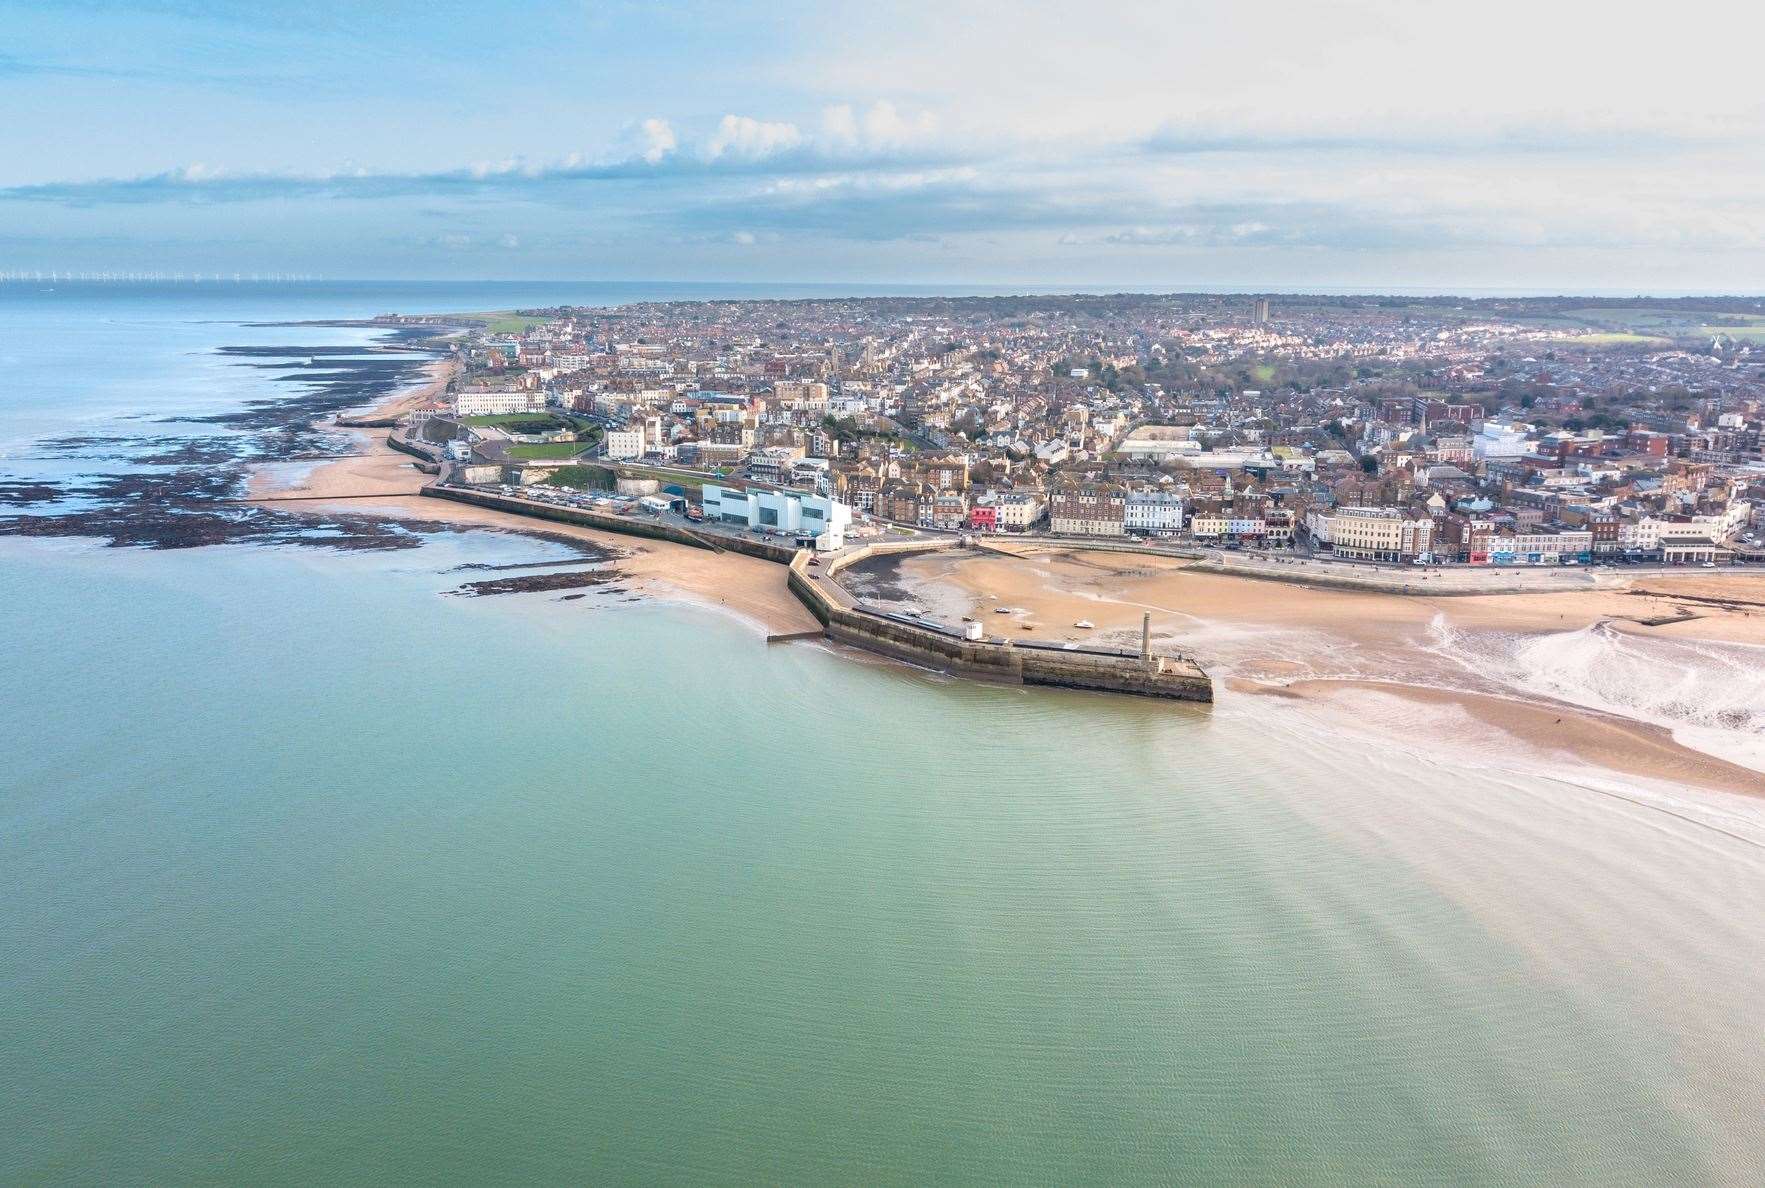 The beach at Margate - our columnist isn’t brave enough to test the waters